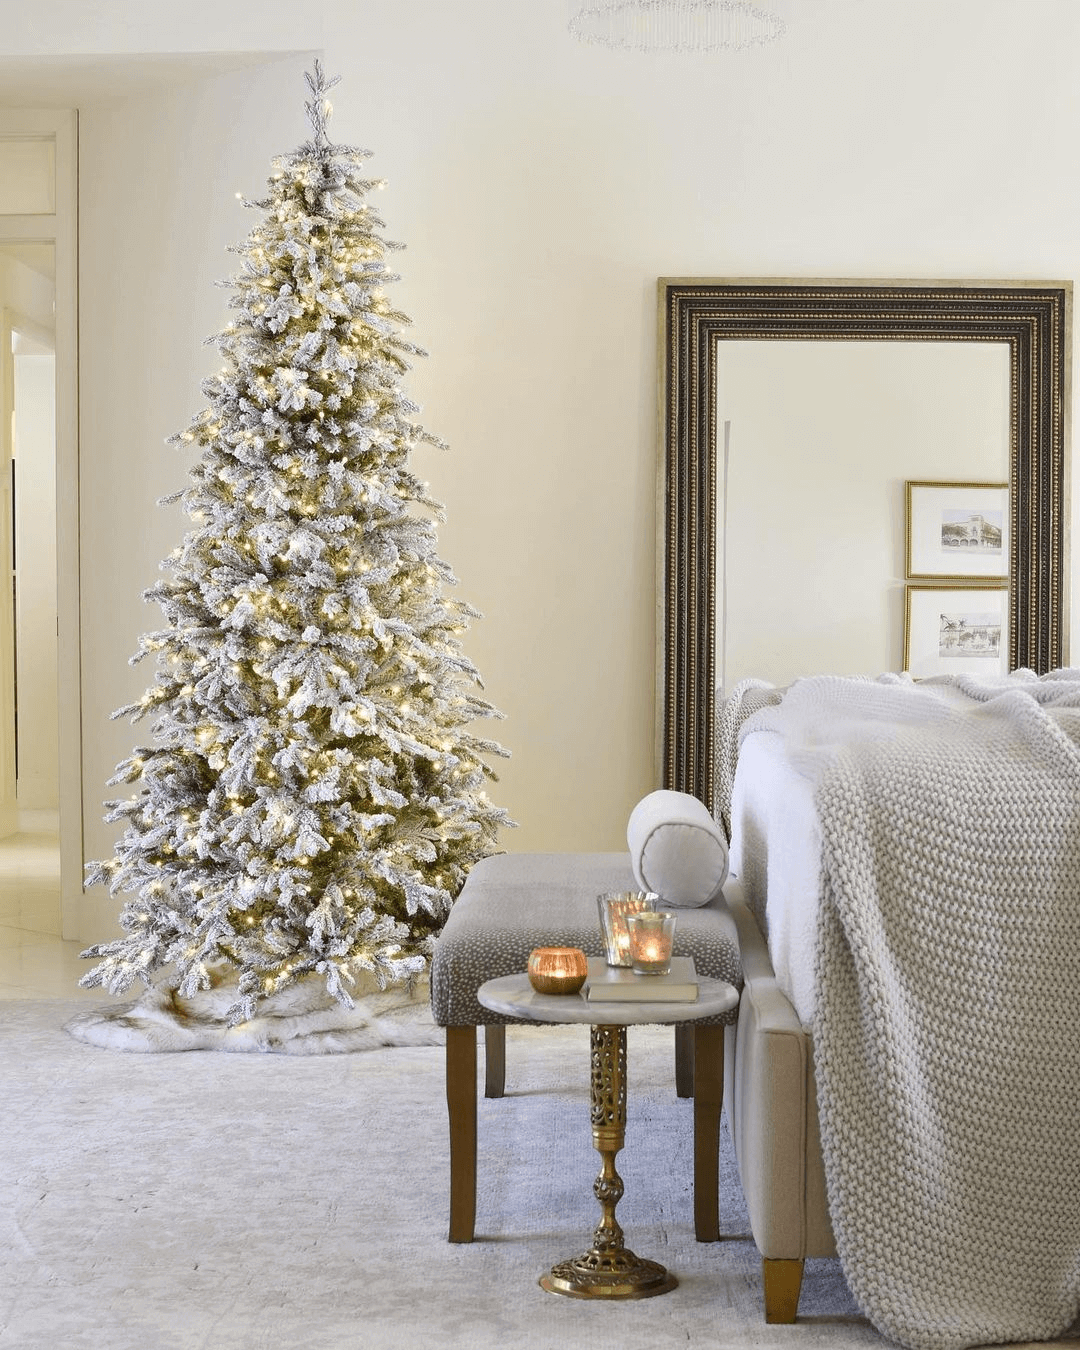 King of Christmas 12' Queen Flock® Slim Artificial Christmas Tree With 1200 Warm White LED Lights